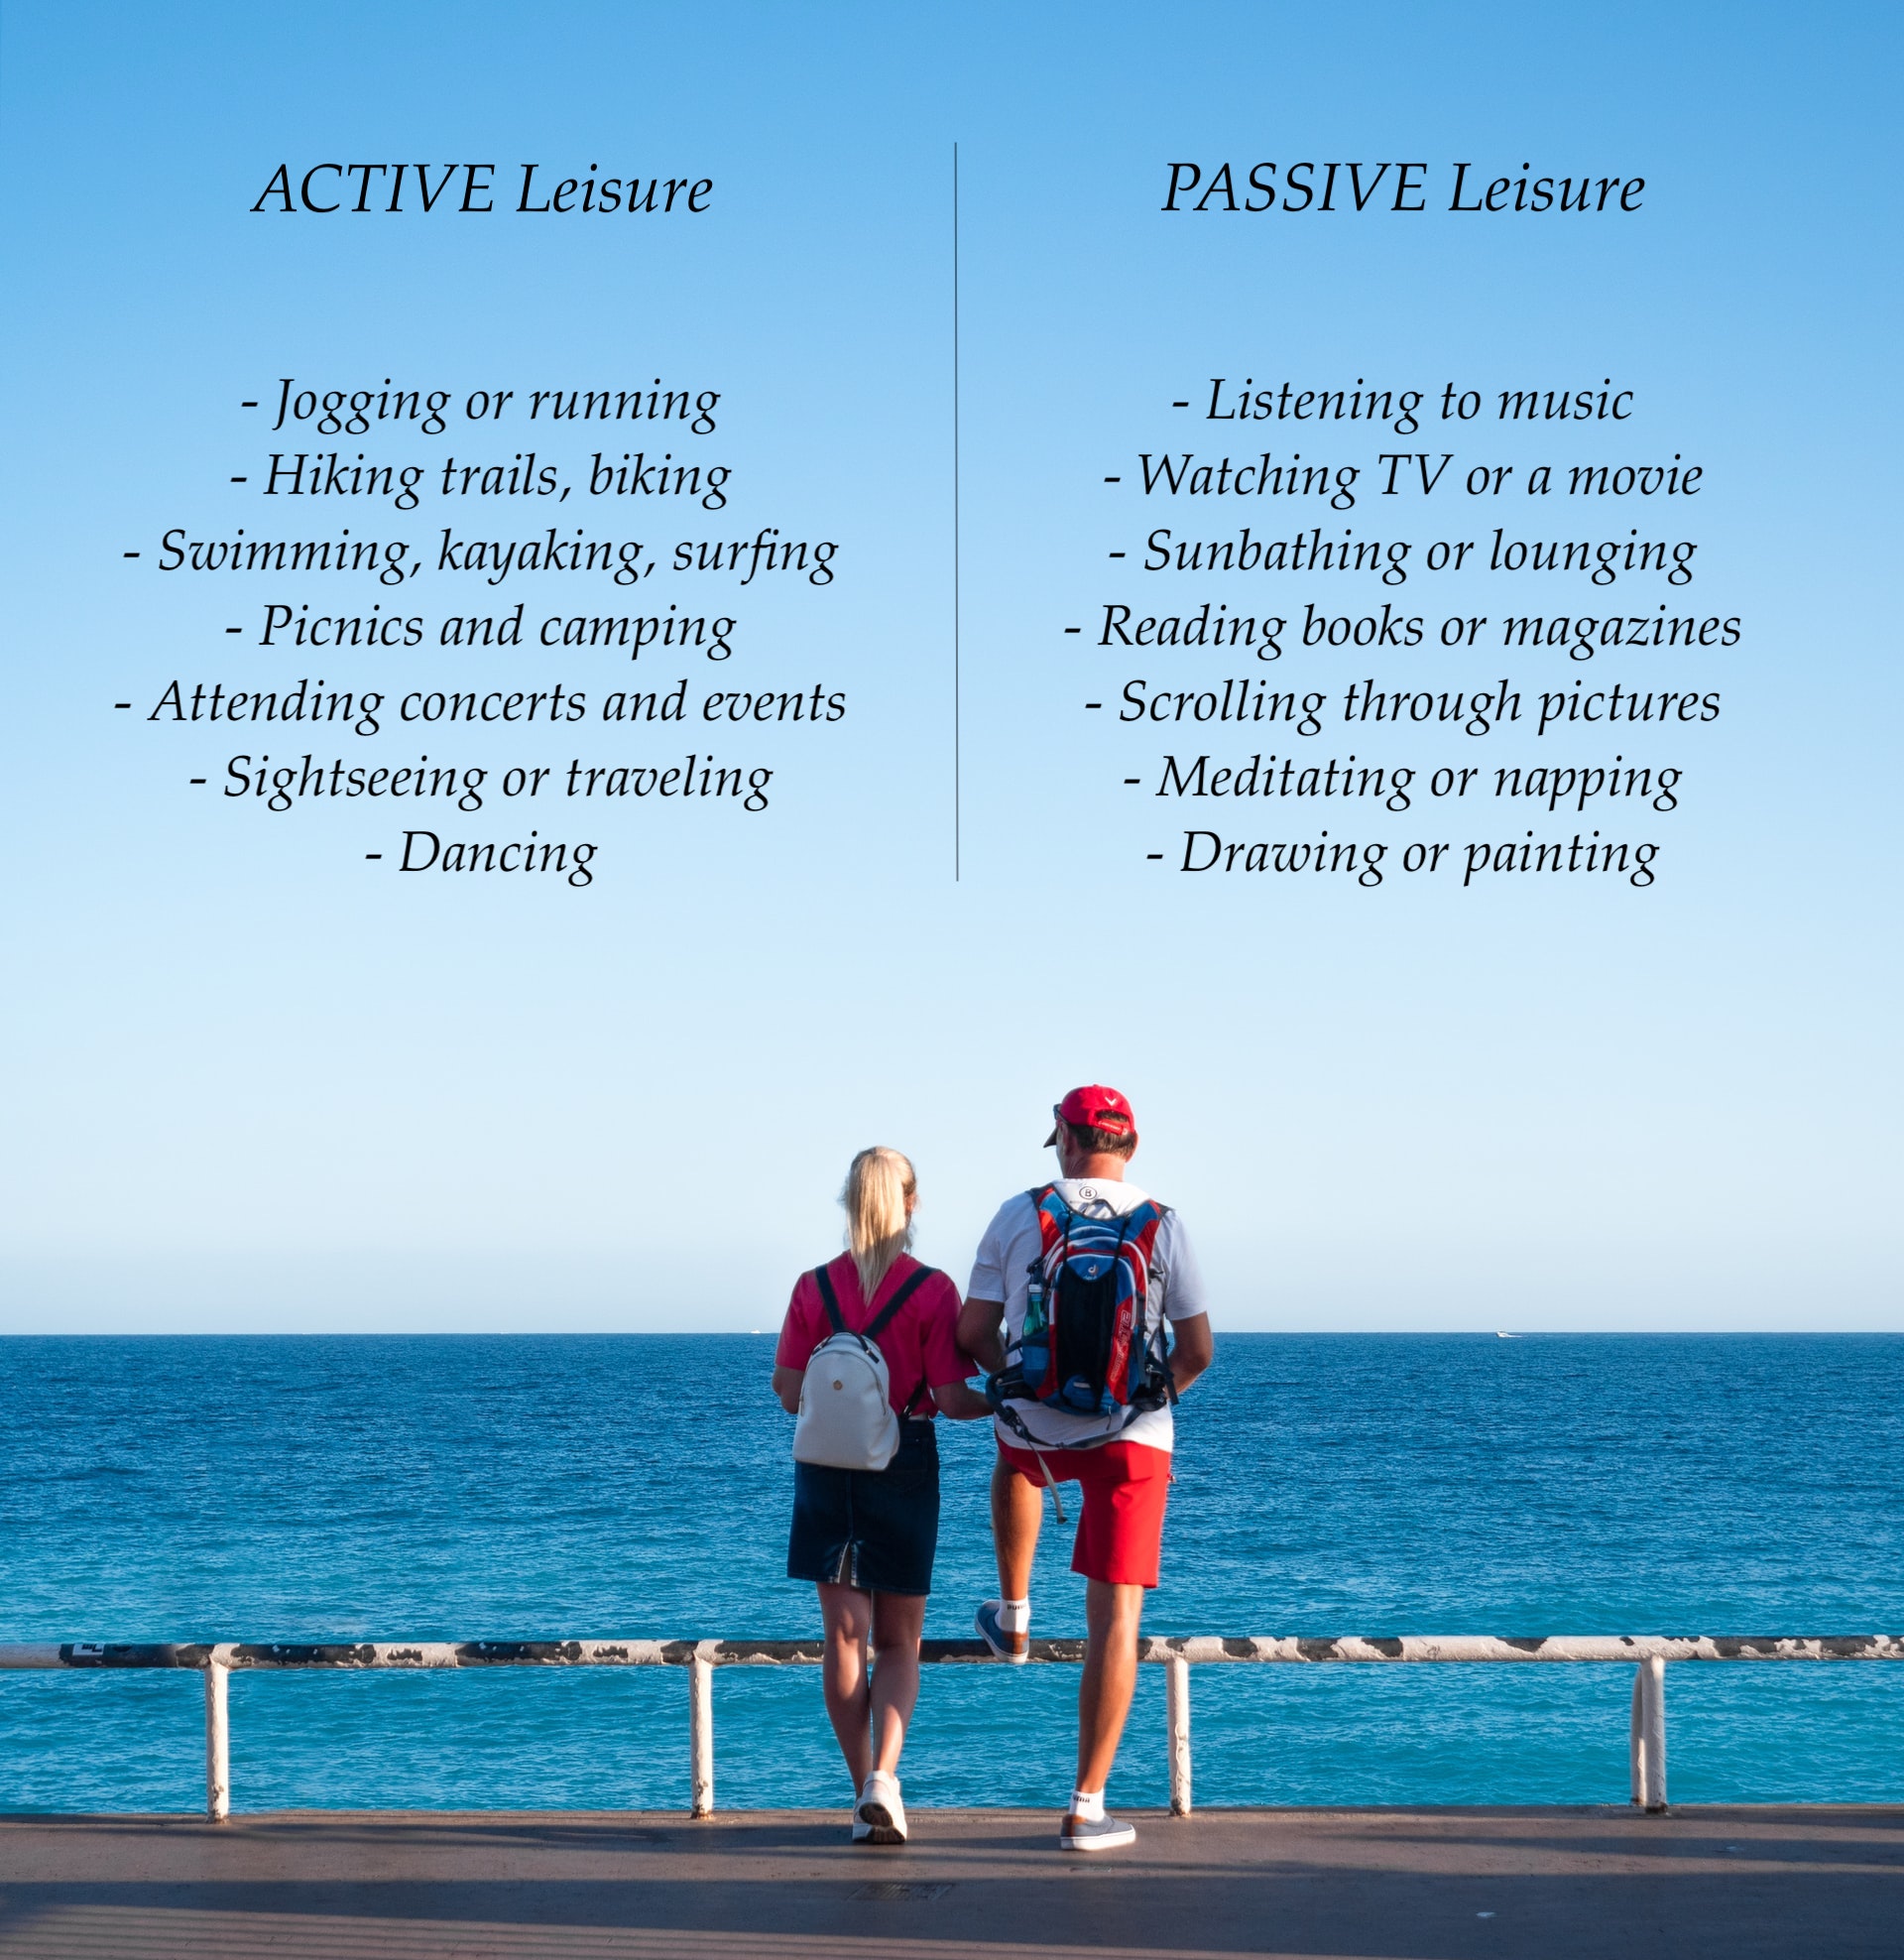 List of active and passive leisure activities